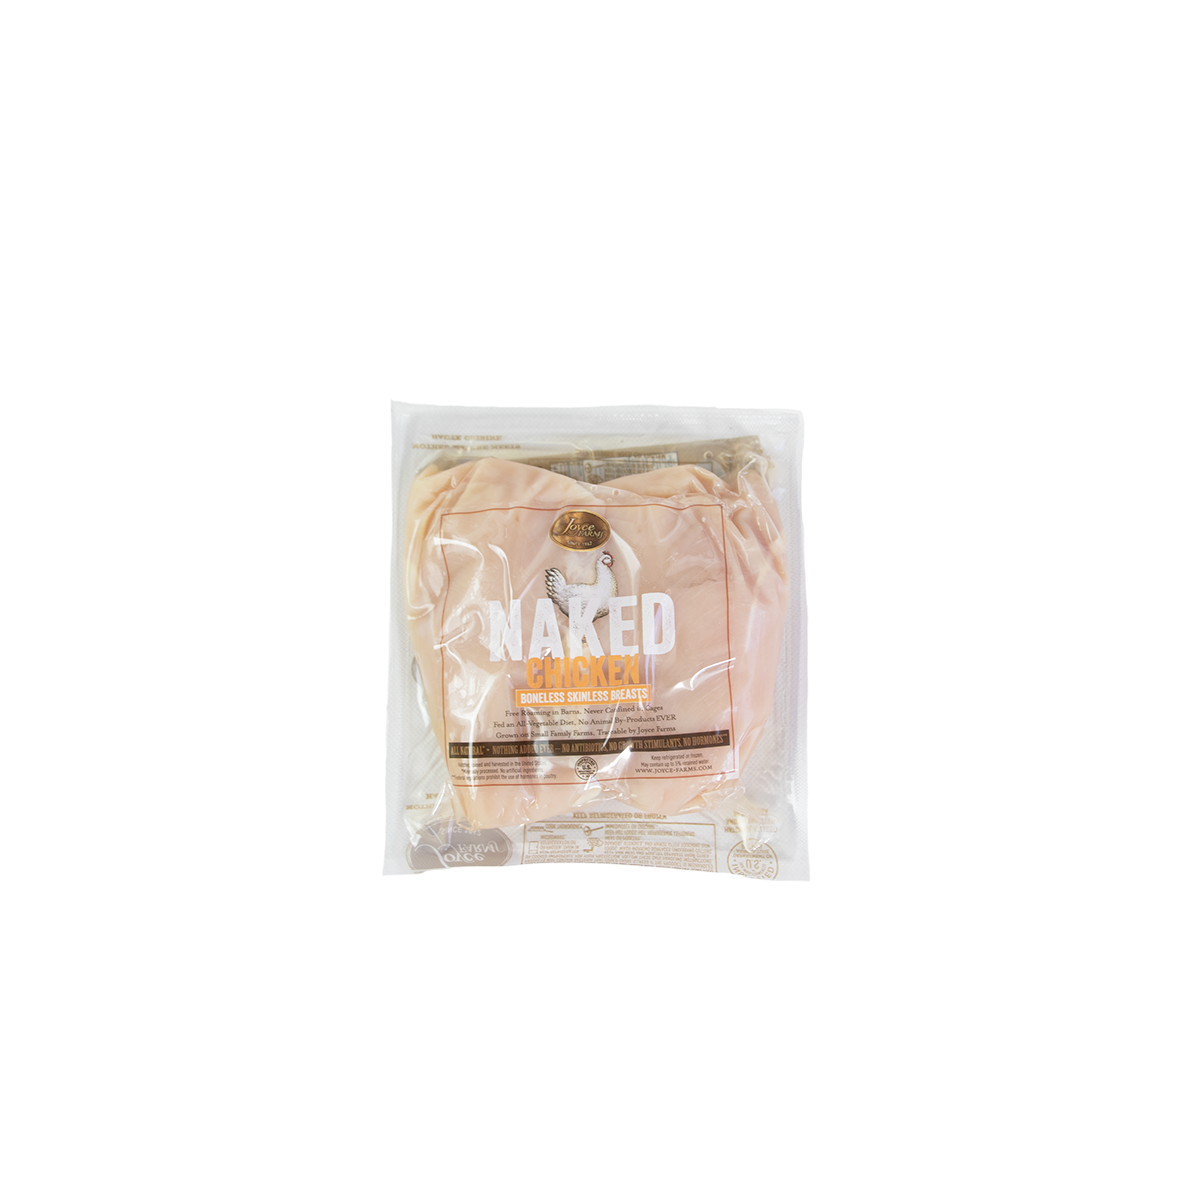 A package of Joyce Farms Boneless Skinless Chicken Breasts (8 packs, 1 lb. per pack) in a plastic bag.